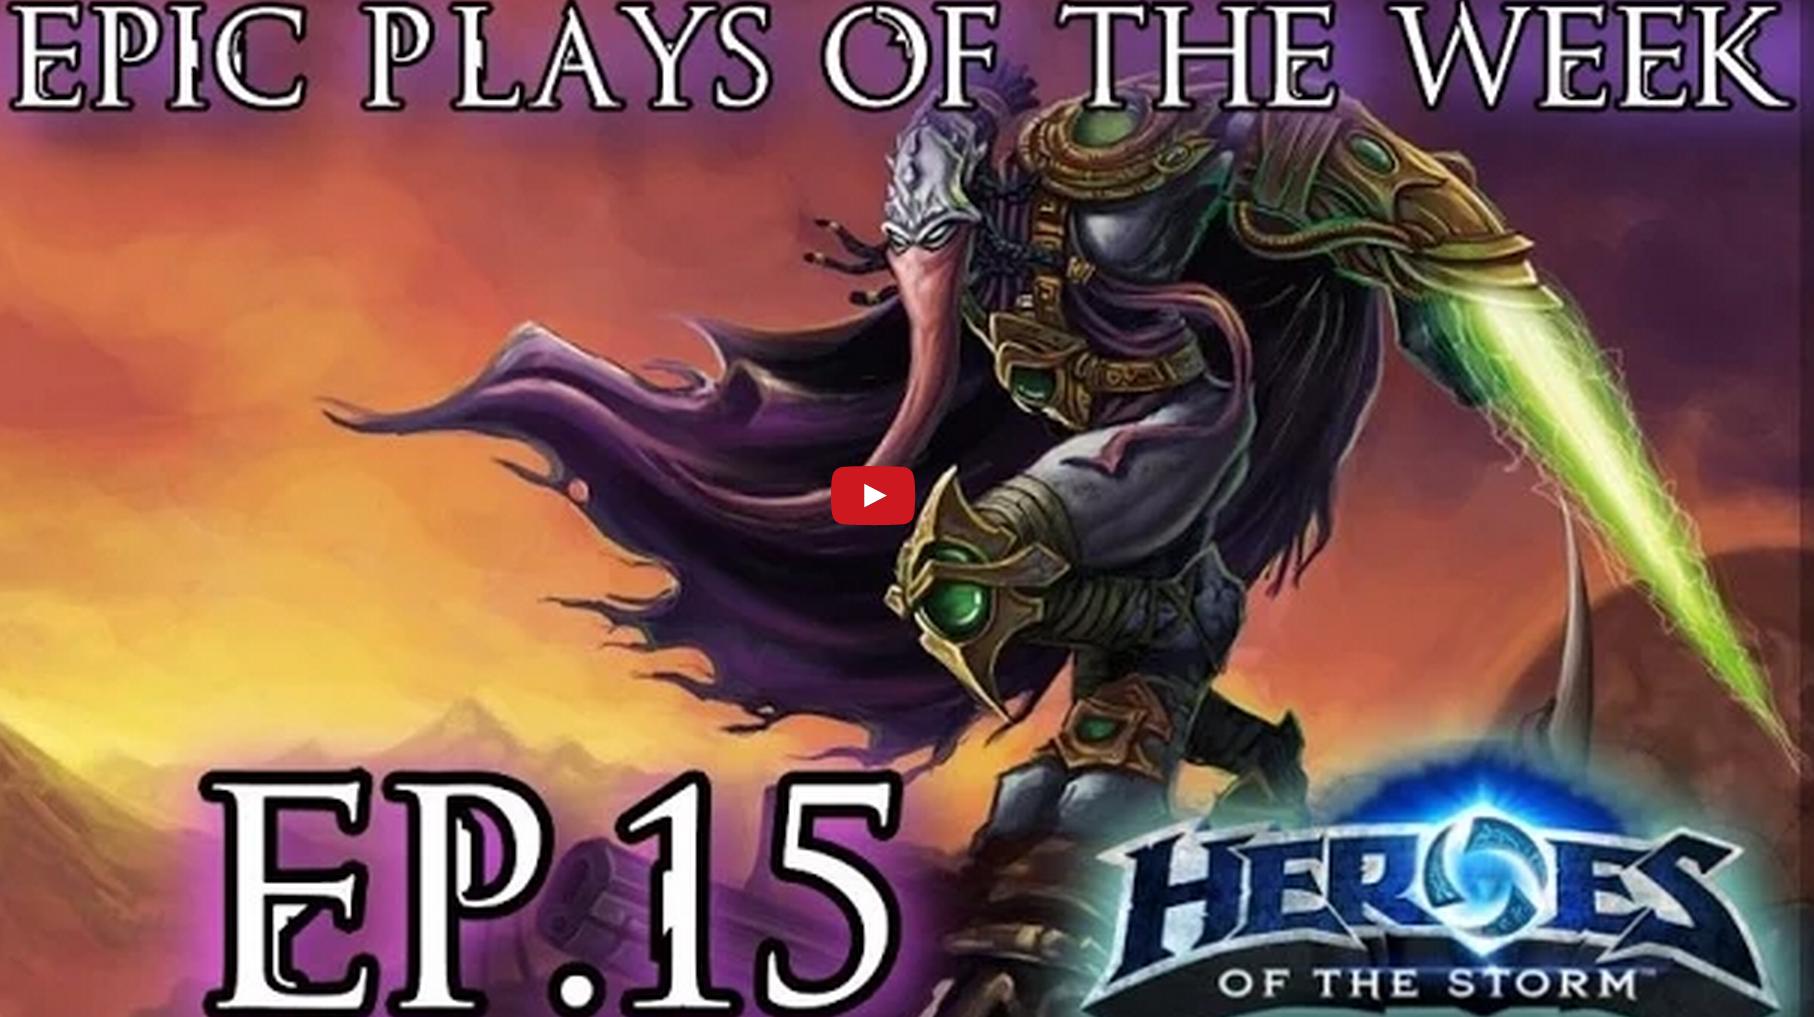 Epic Plays of the Week: la numero 15 di Heroes of the Storm